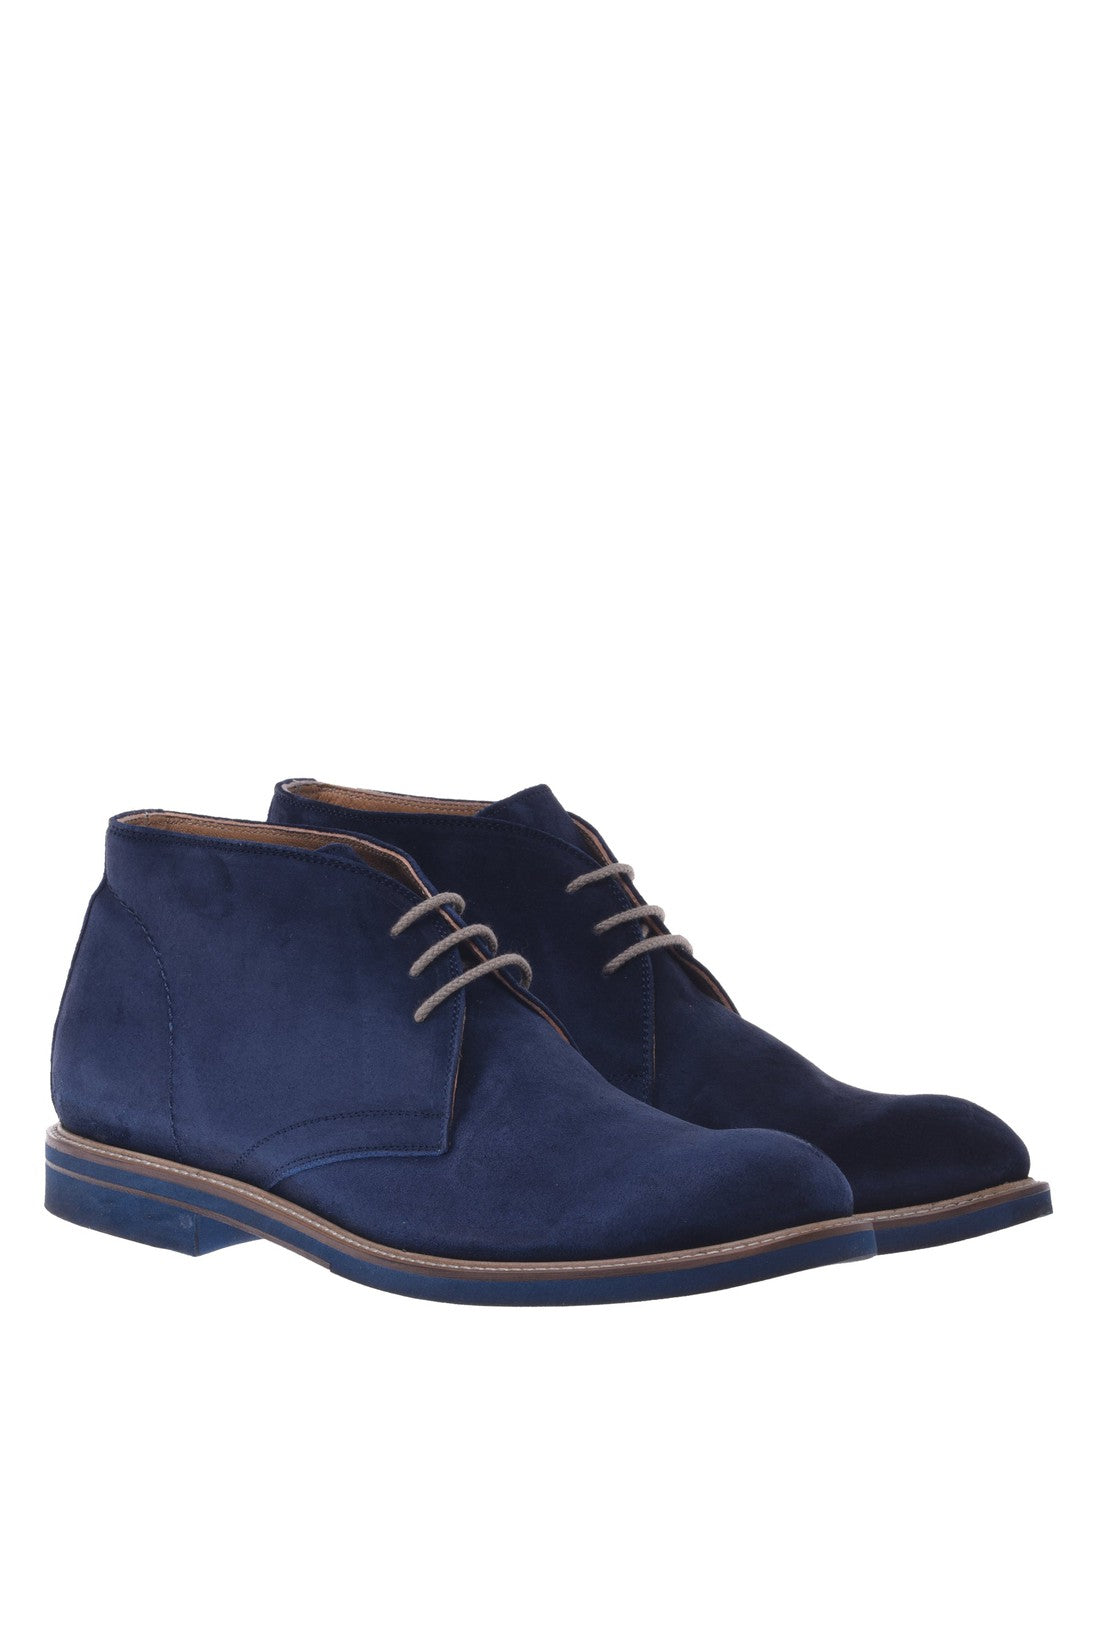 Ankle boot in blue suede leather